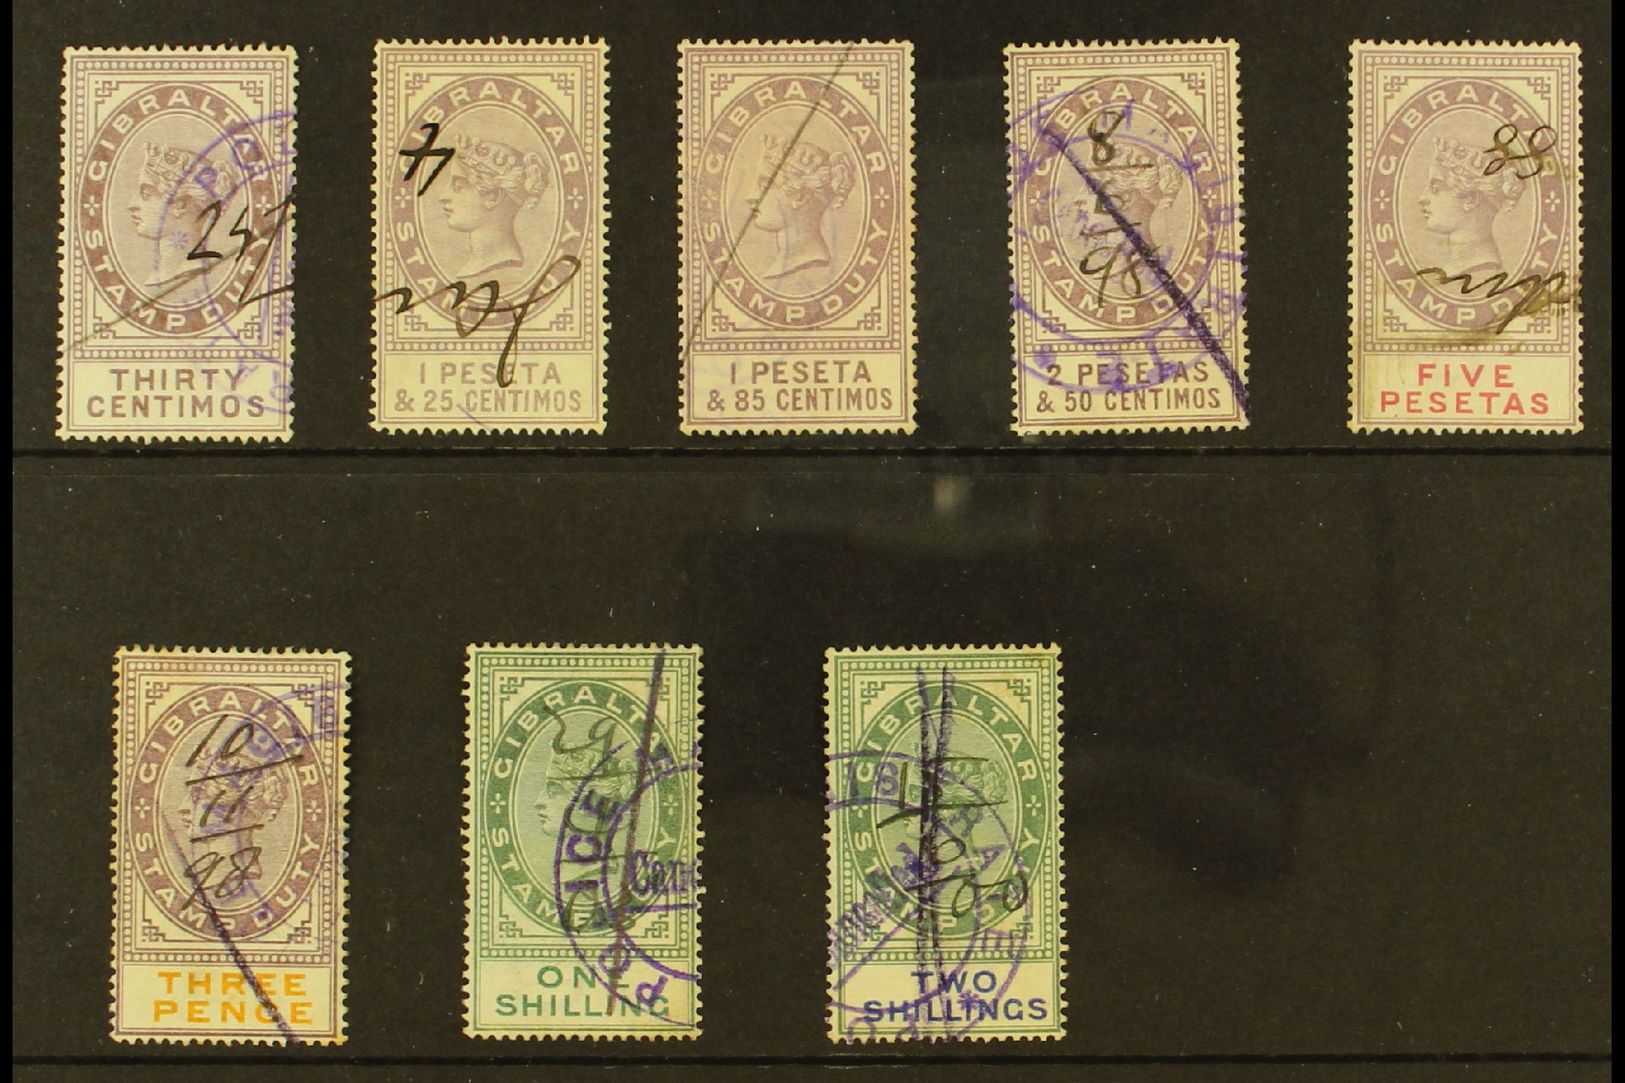 6413 REVENUE STAMPS STAMP DUTY 1894 30c, 1p25, 1p85, 2p50 And 5p (Barefoot 1/2 & 4/6); Plus 1898 3d, 1s And 2s (Barefoot - Gibraltar